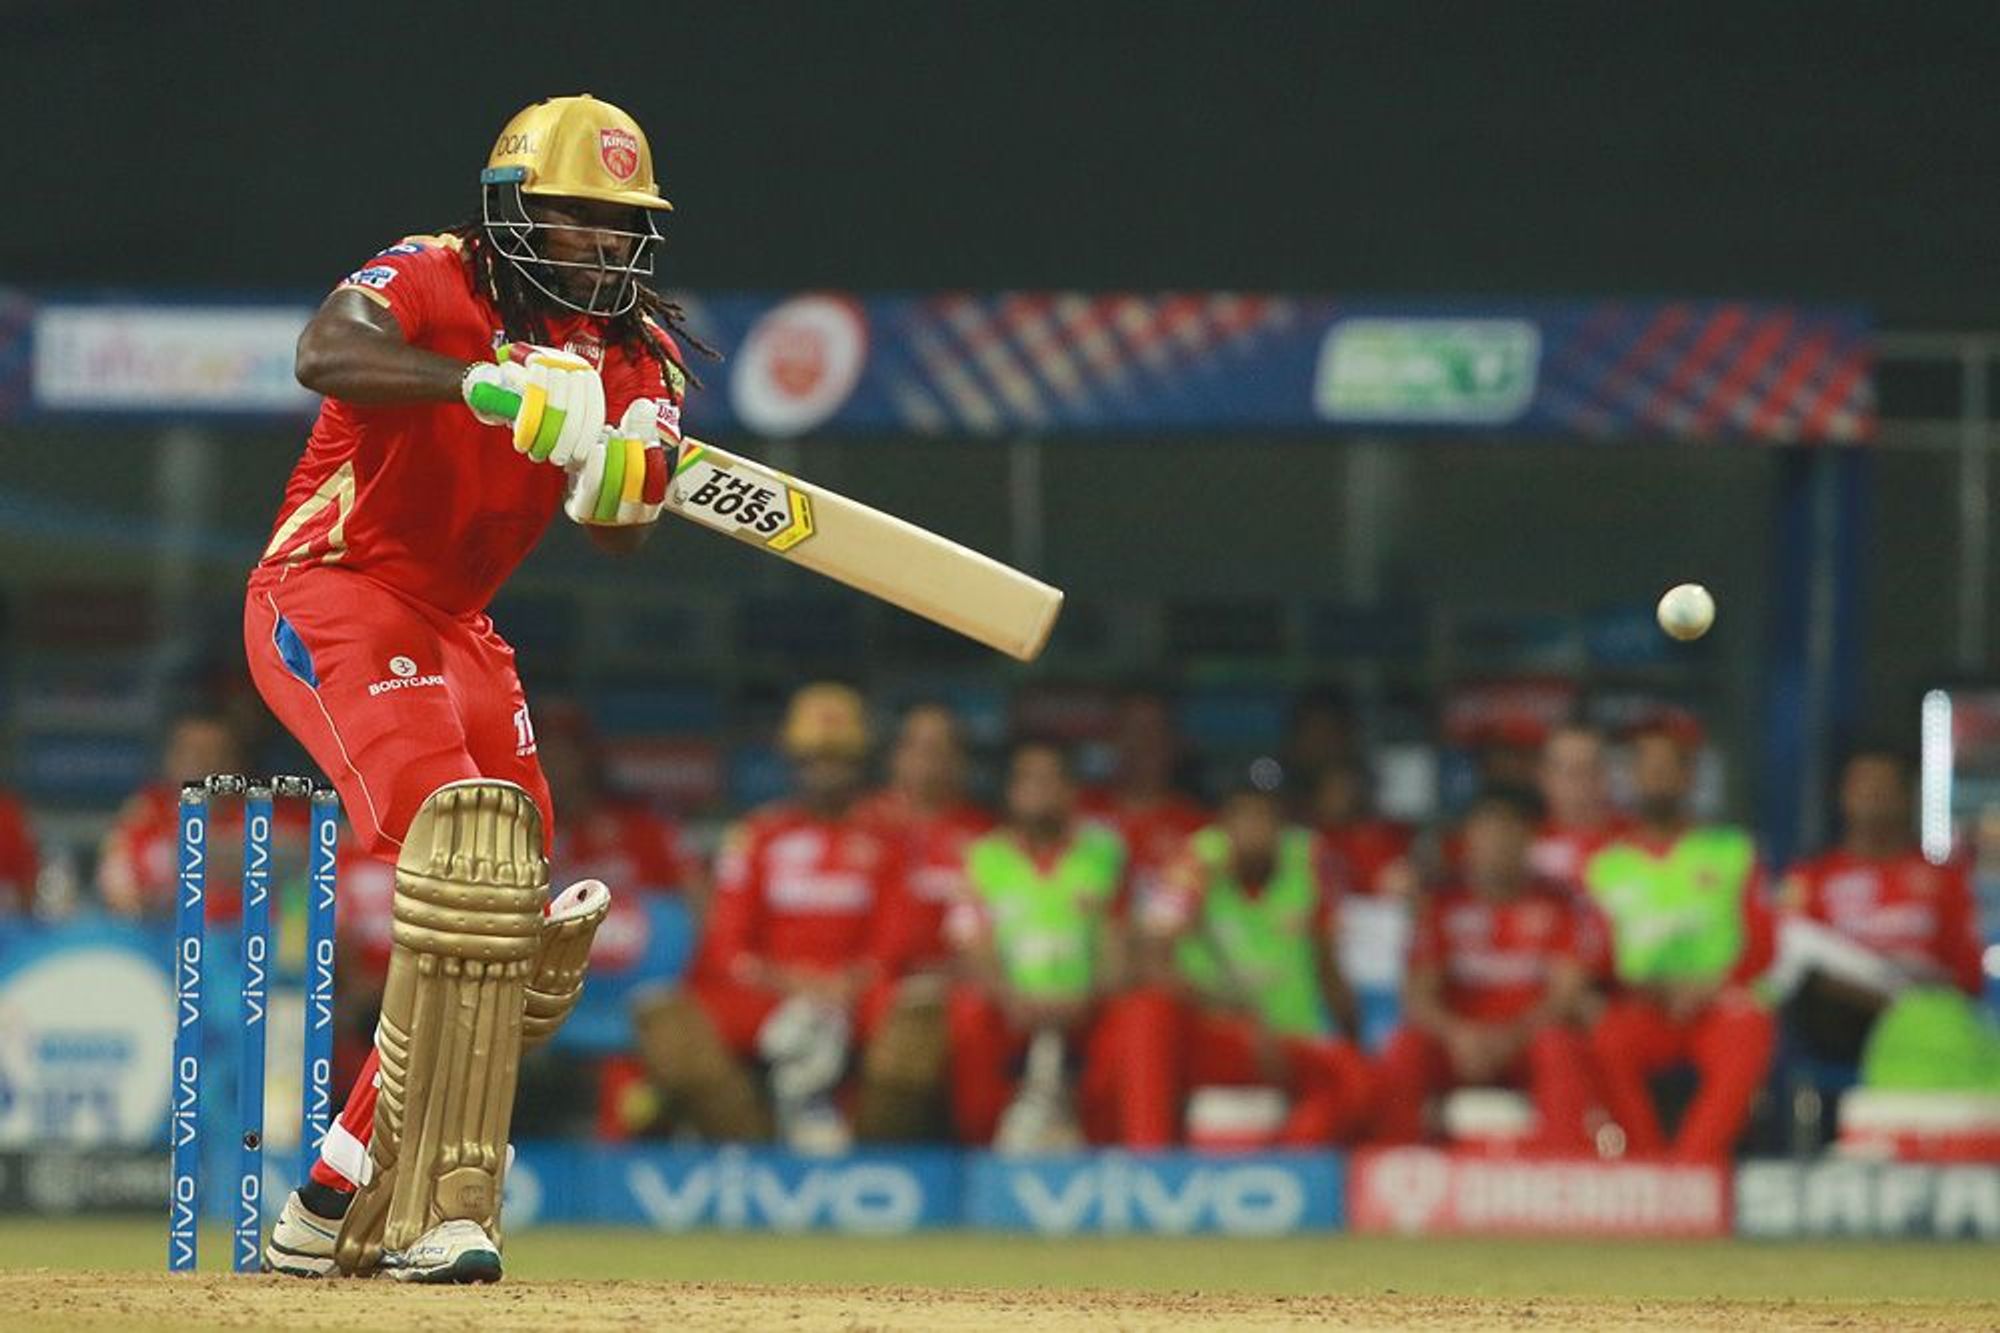 Chris Gayle is one of the oldest cricketers featuring in the ongoing IPL 2021 | BCCI/IPL